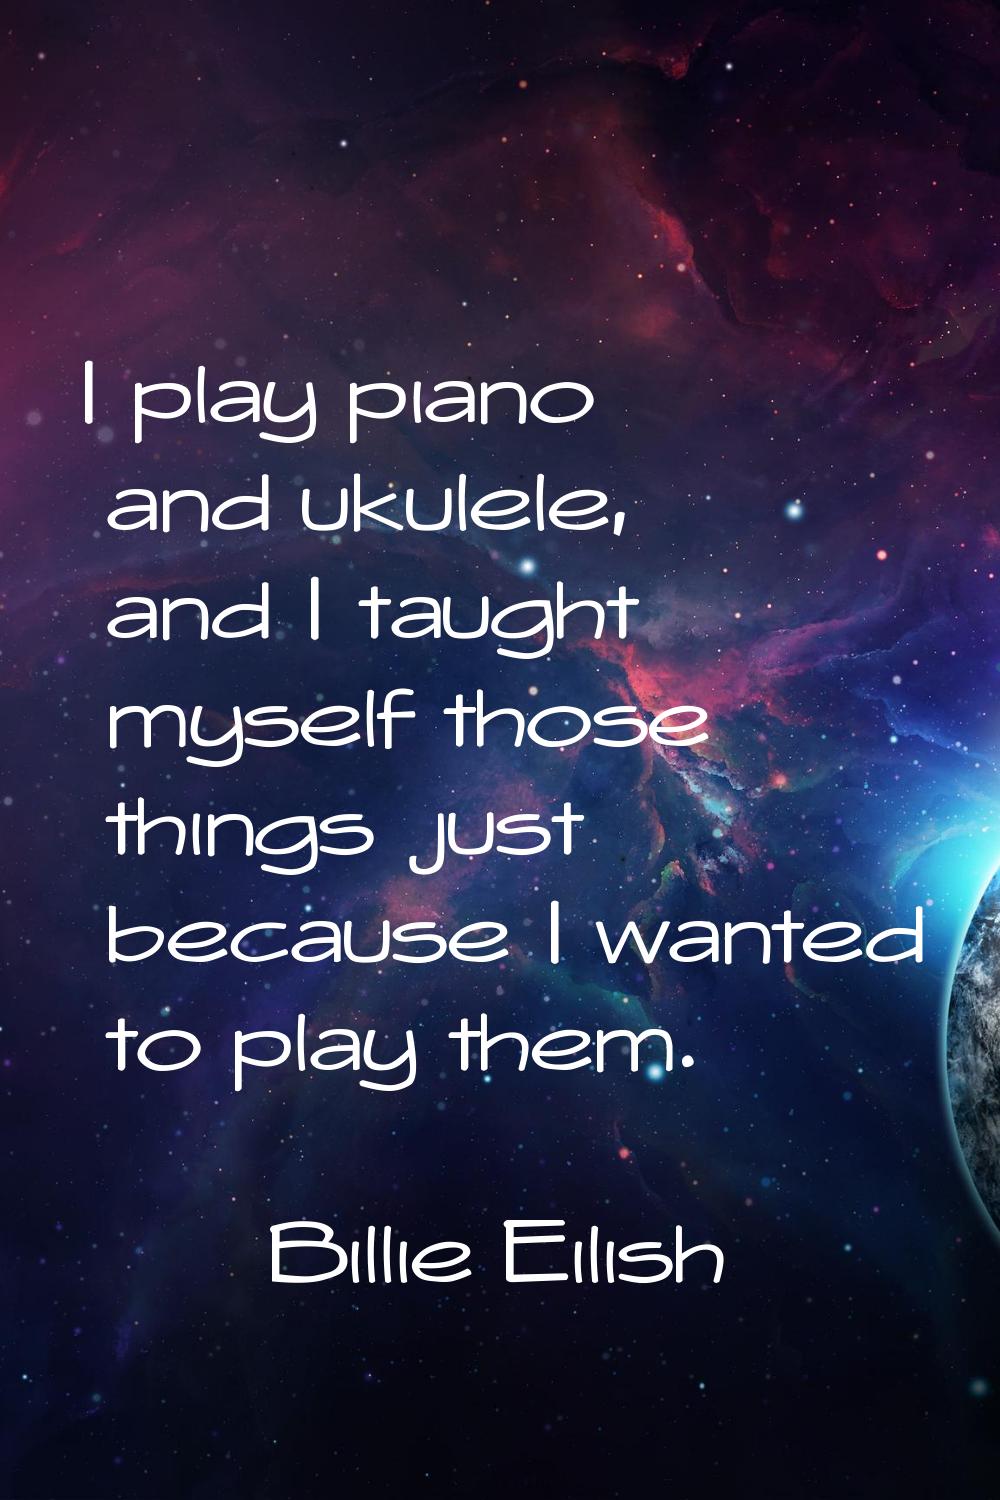 I play piano and ukulele, and I taught myself those things just because I wanted to play them.